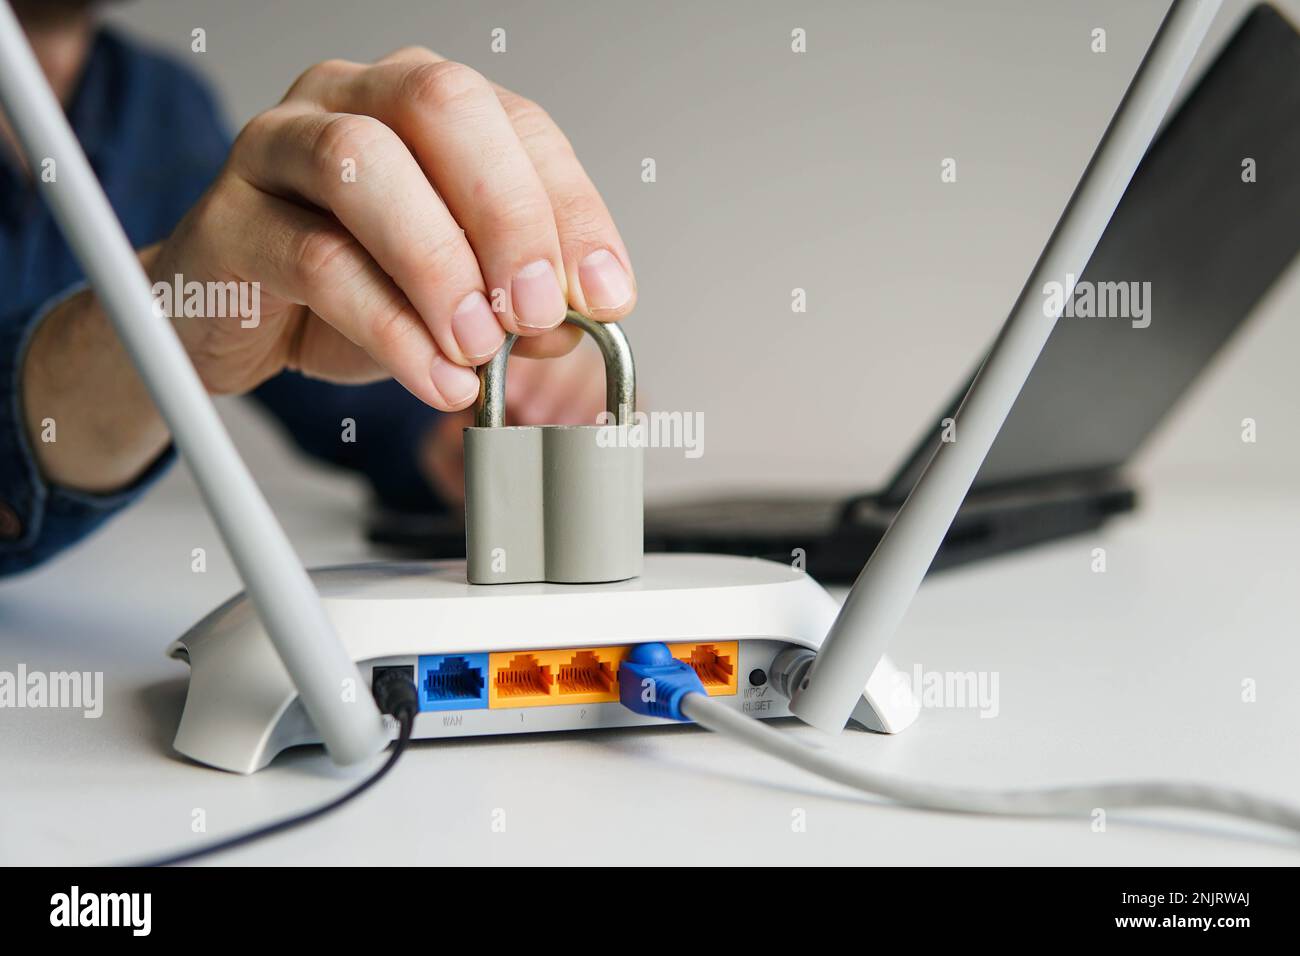 High speed wi-fi router with lock. Man using laptop on the background.  Password protected wifi network and internet censorship concept Stock Photo  - Alamy